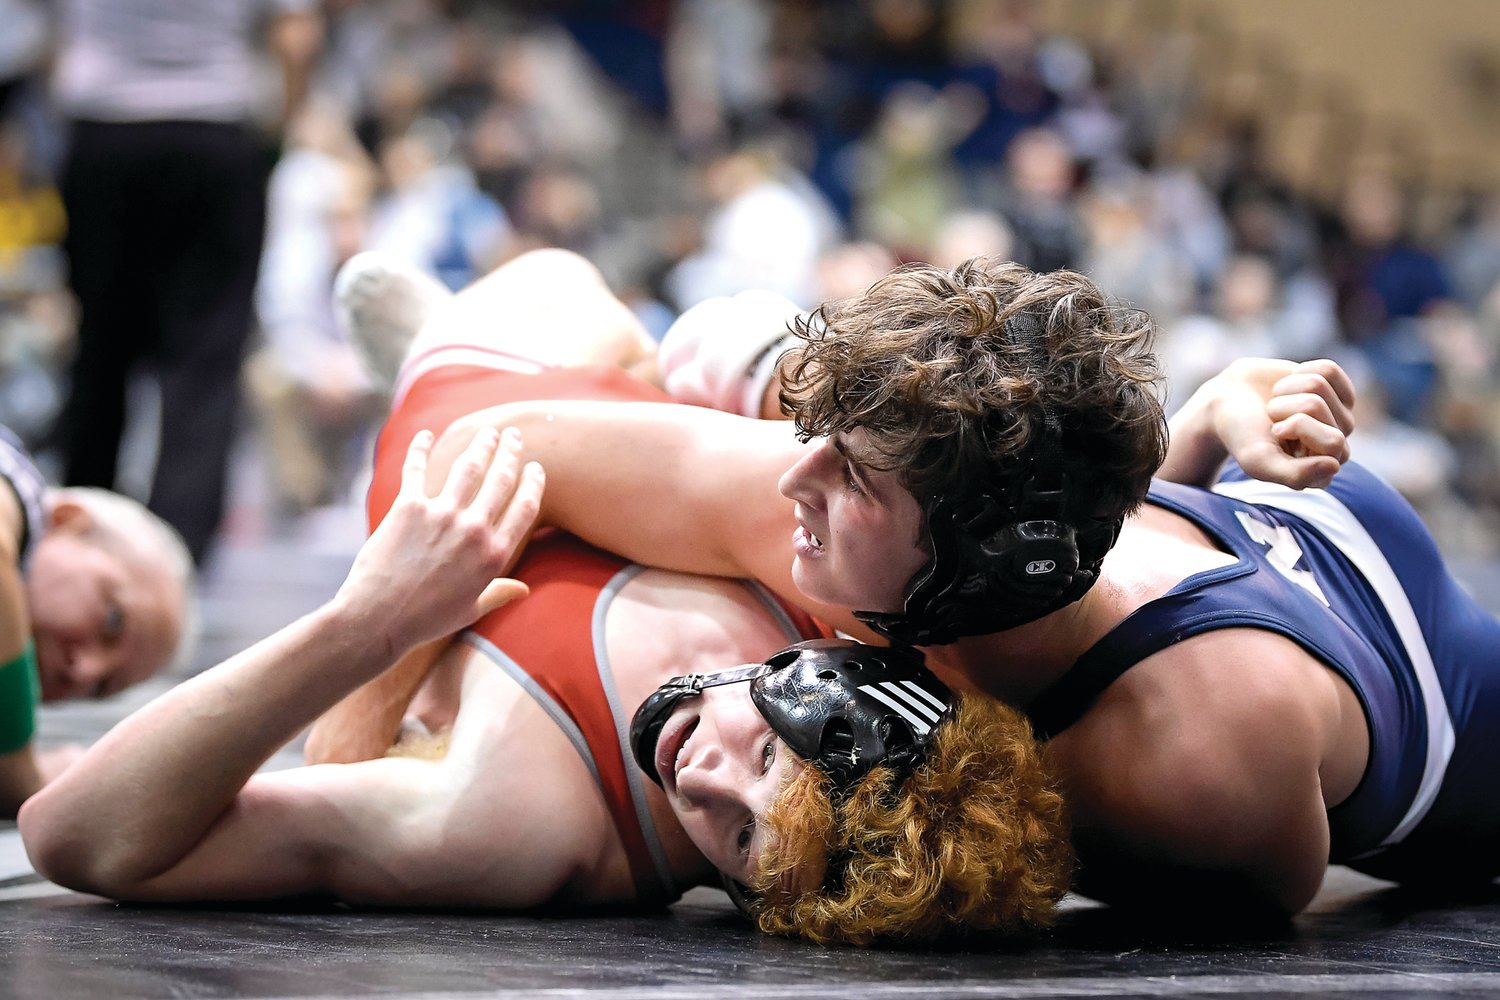 Council Rock North’s Zack Silber (on top) battles St. Joseph Prep’s Charles Kitching in an early 145-pound match. Silber would advance with a 5-2 decision.